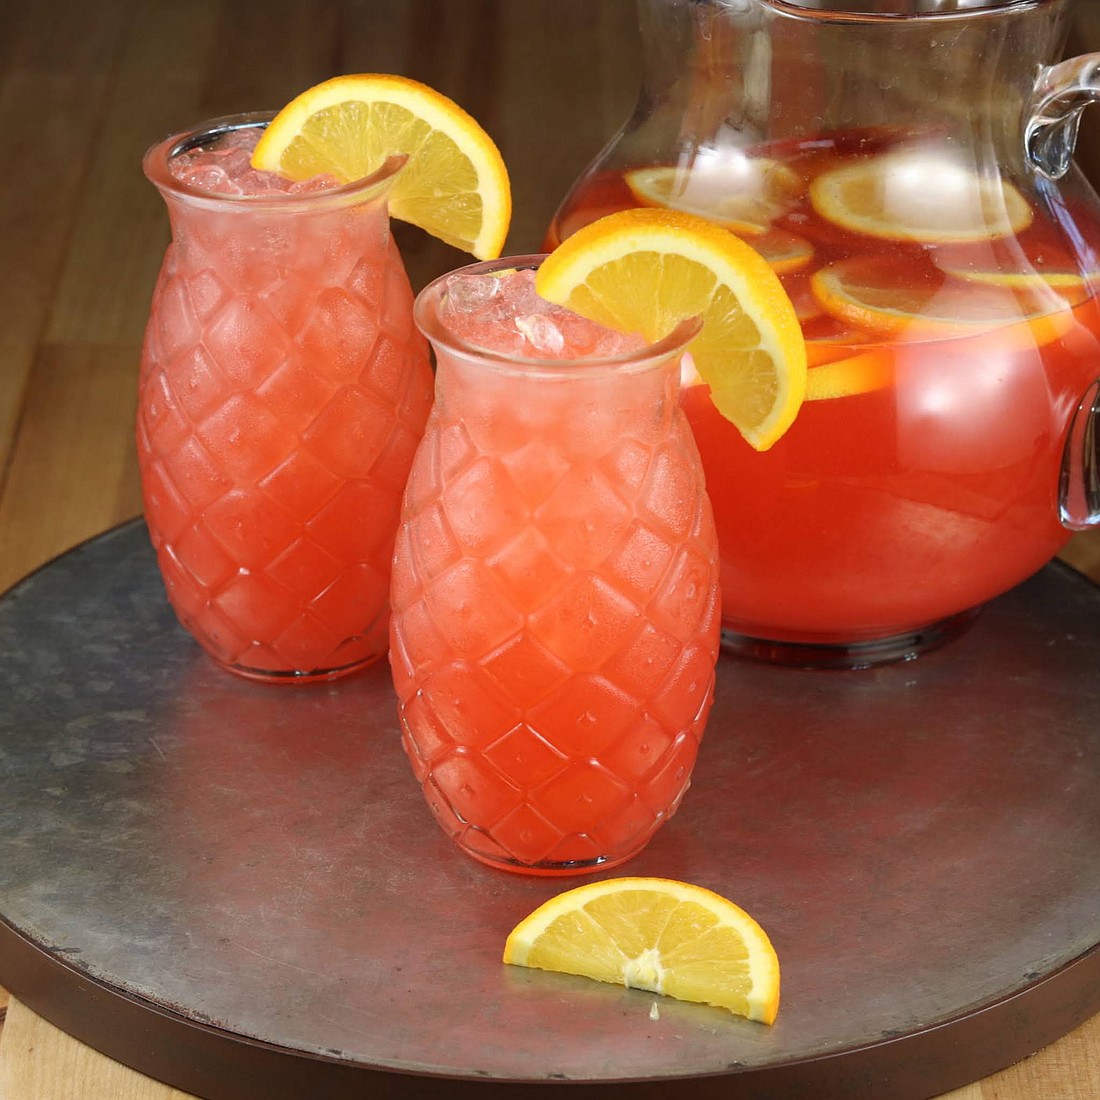 Rather than indulge in high-sugar drinks, try this low-calorie punch for a kick.